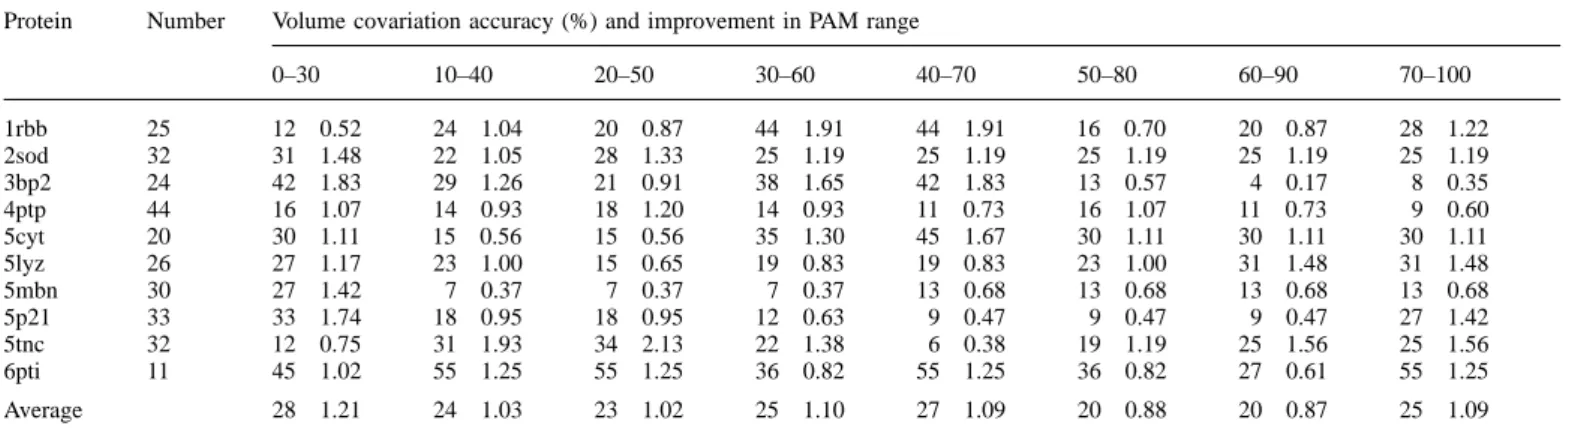 Table III. S scores for the number of predicted covariation sites in the test proteins